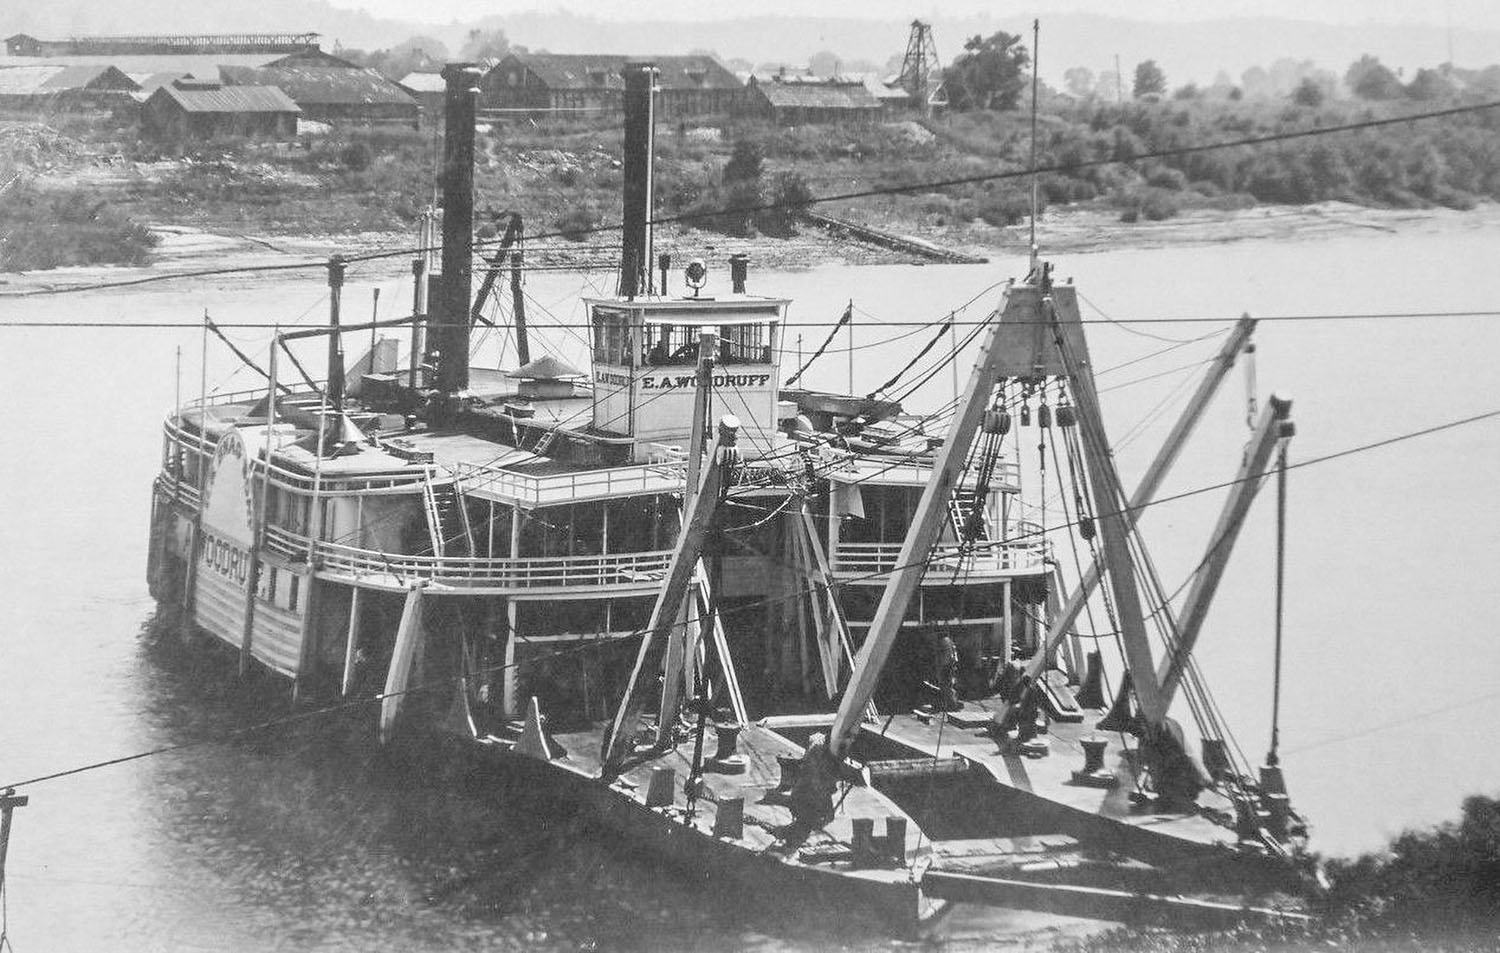 The snagboat E.A. Woodruff at work on the Ohio River. (Keith Norrington collection)